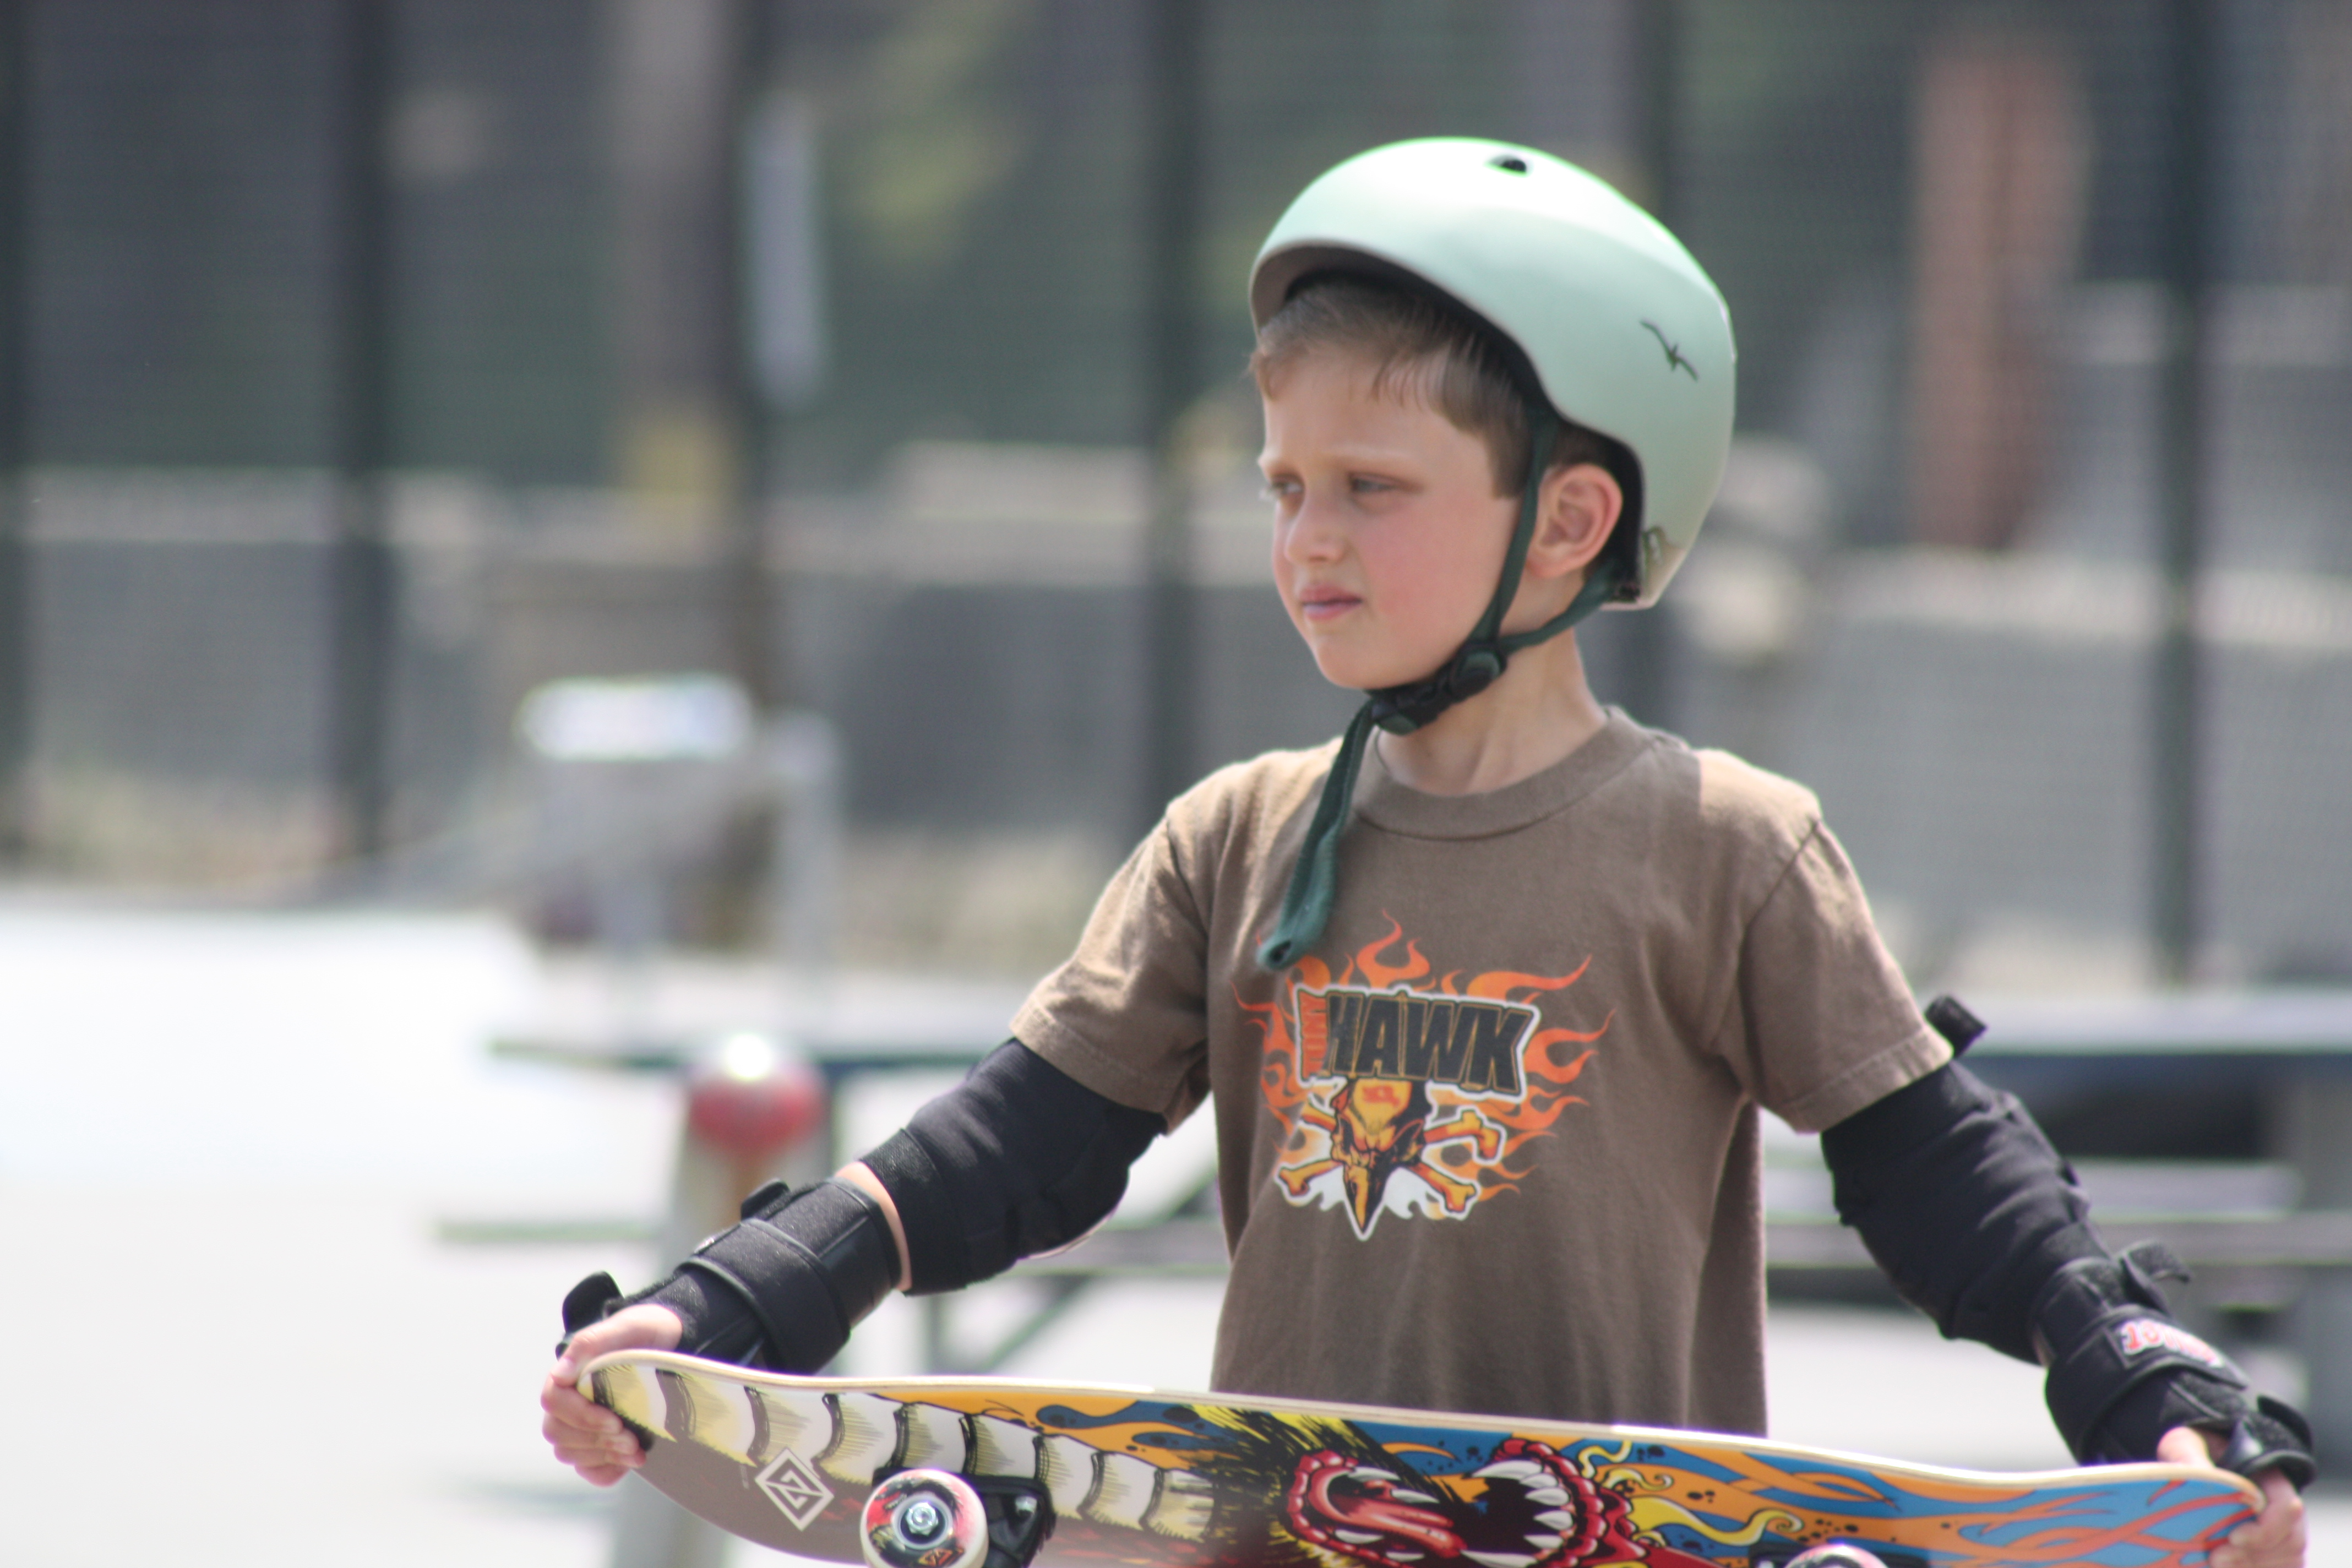 The kid with his Tony Hawk shirt, before he got the crappy game as a present